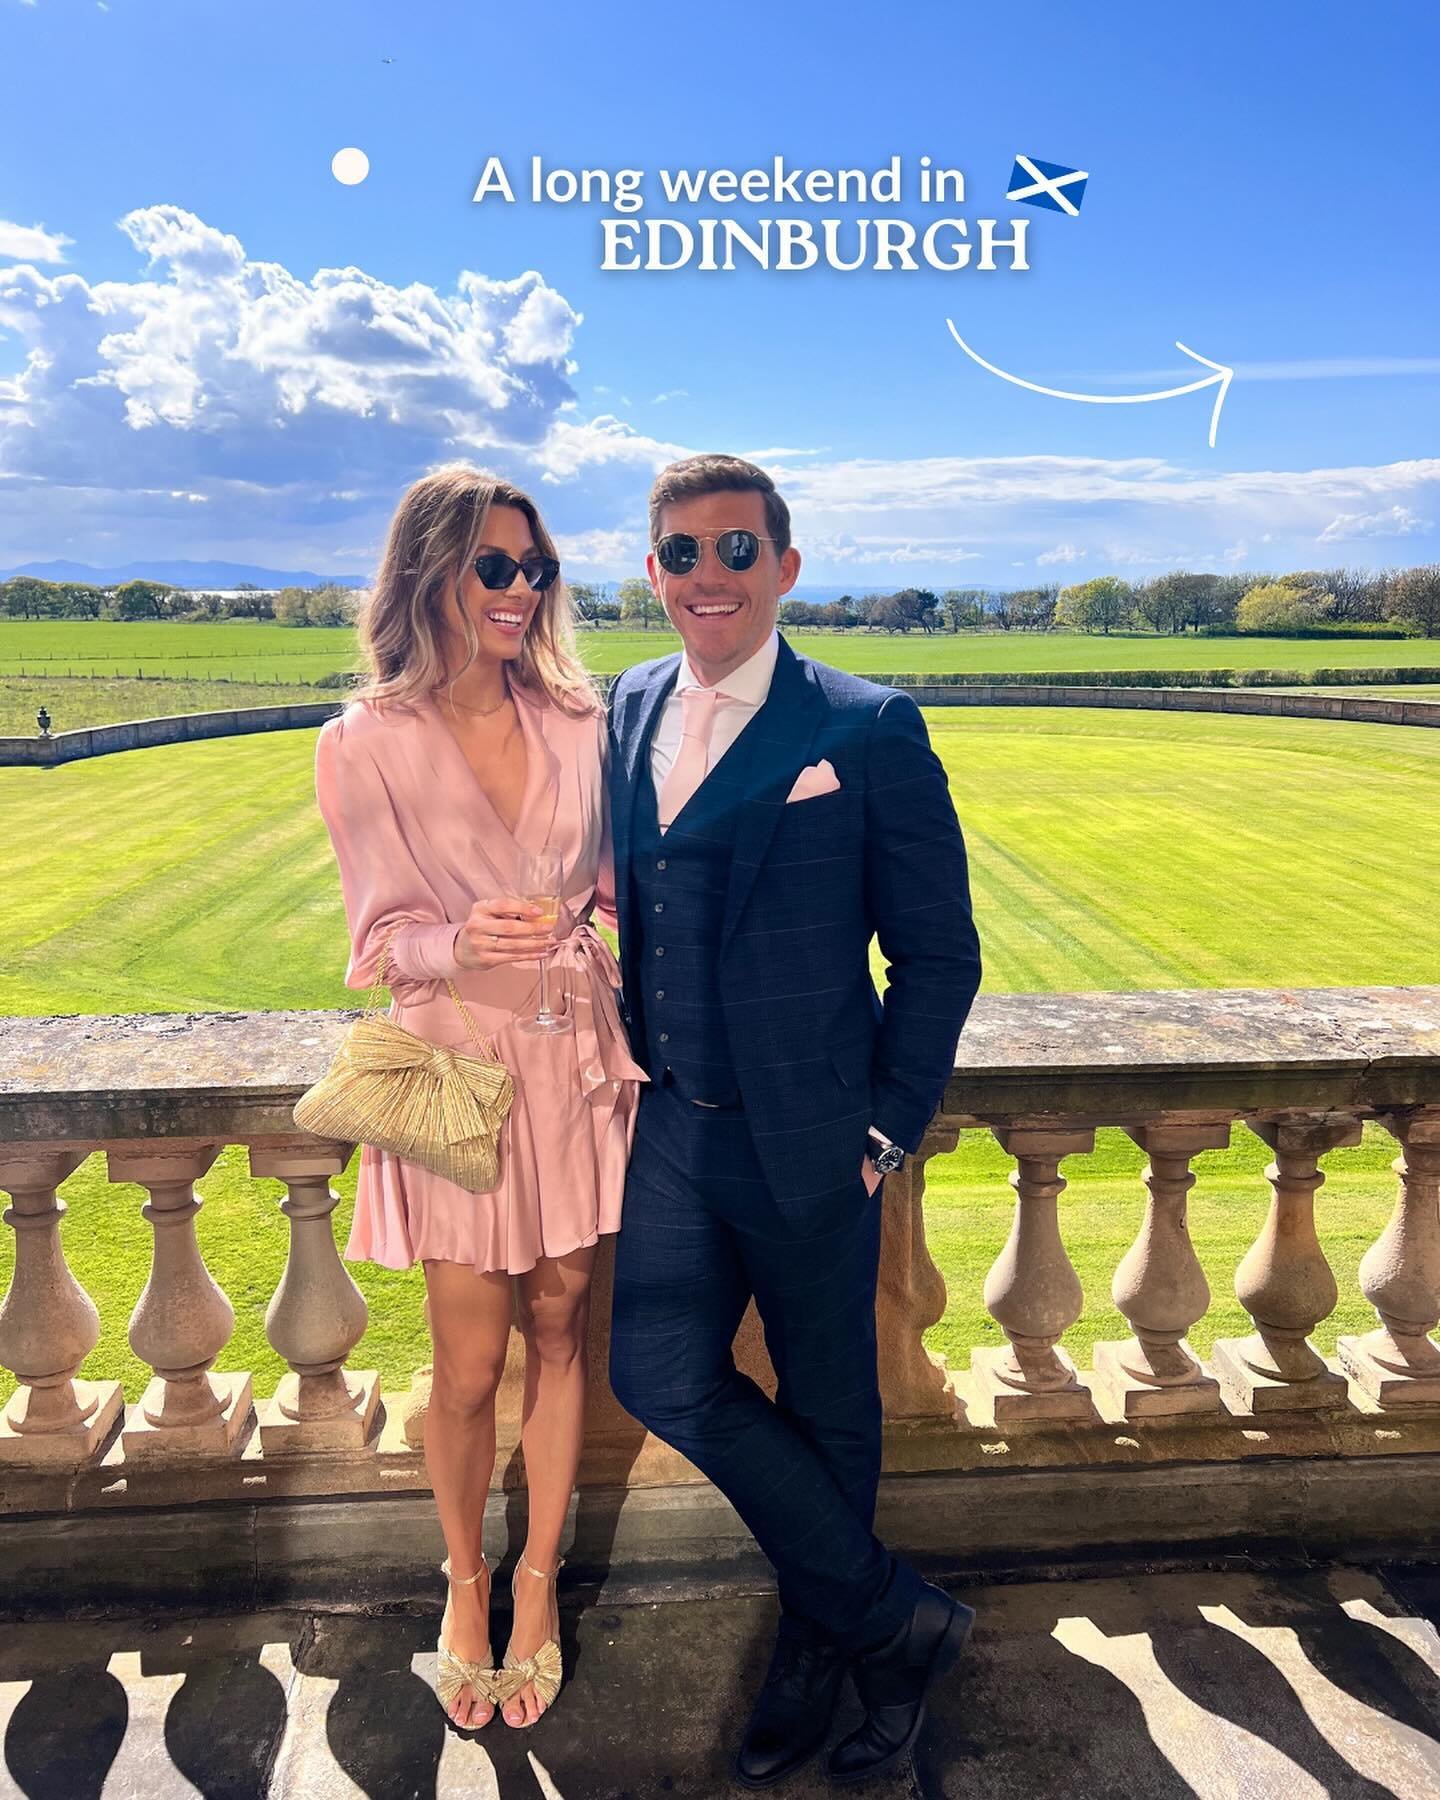 EDINBURGH I &lt;3 YOU!!!! Trip details below&nbsp;🏴󠁧󠁢󠁳󠁣󠁴󠁿💙👇🏼

I visited Edinburgh for the first time this past weekend and honestly&hellip; I LOVED IT SO MUCH! We primarily went as we kindly got invited to a wedding but we made a long weeke